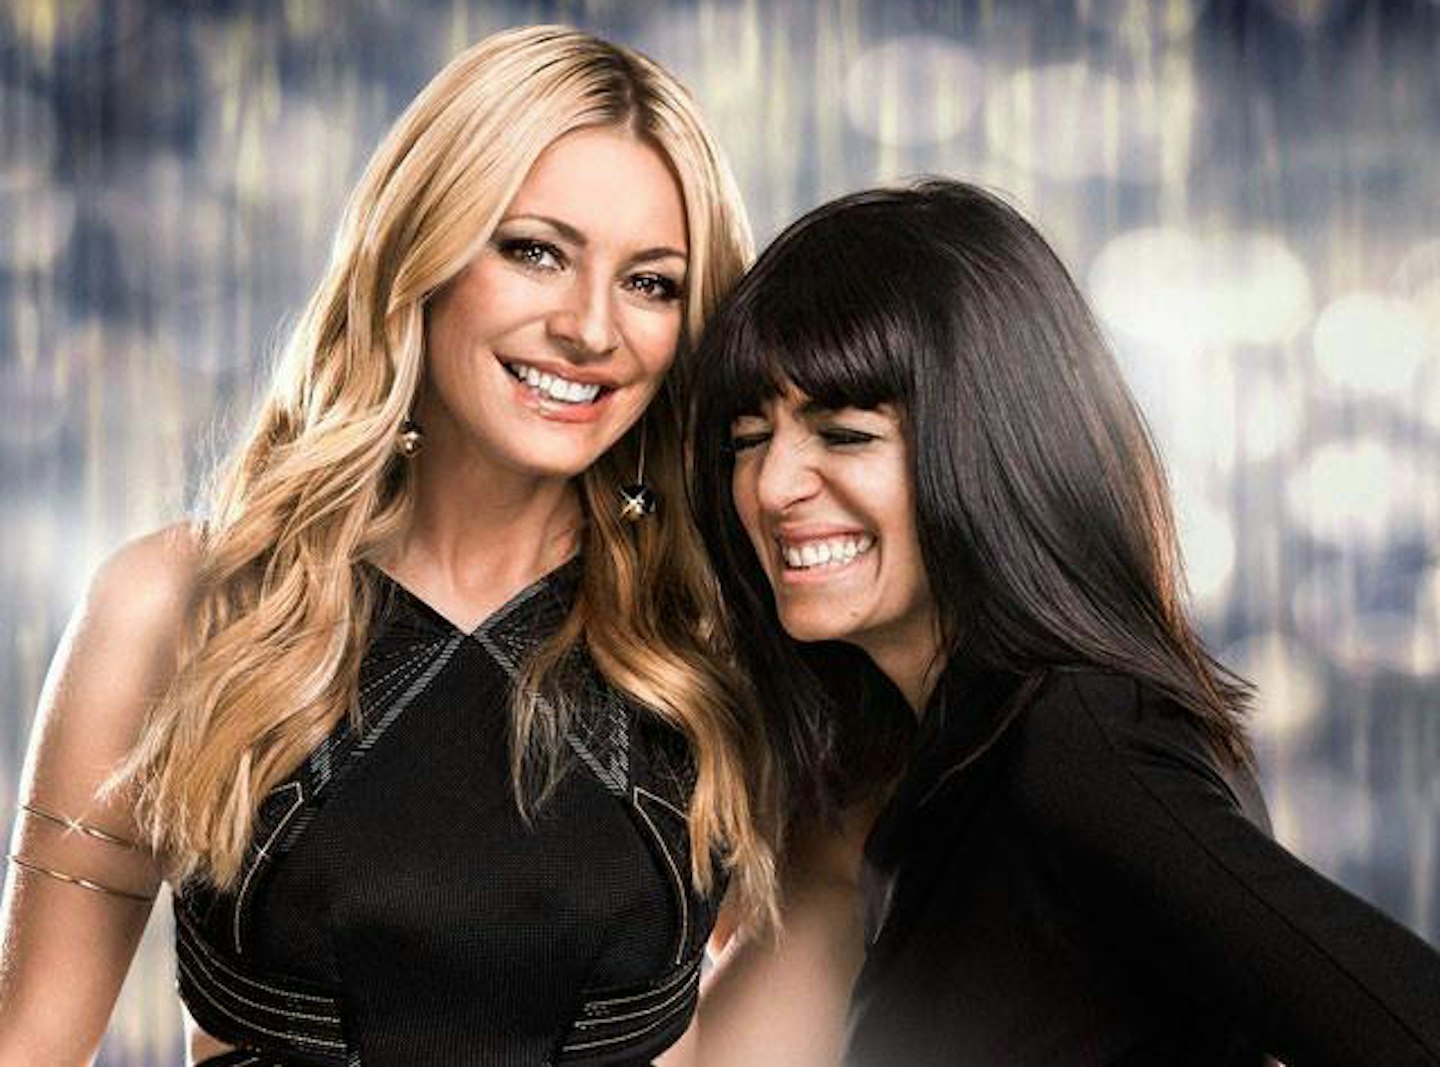 tess-daly-claudia-winkleman-strictly-come-dancing 